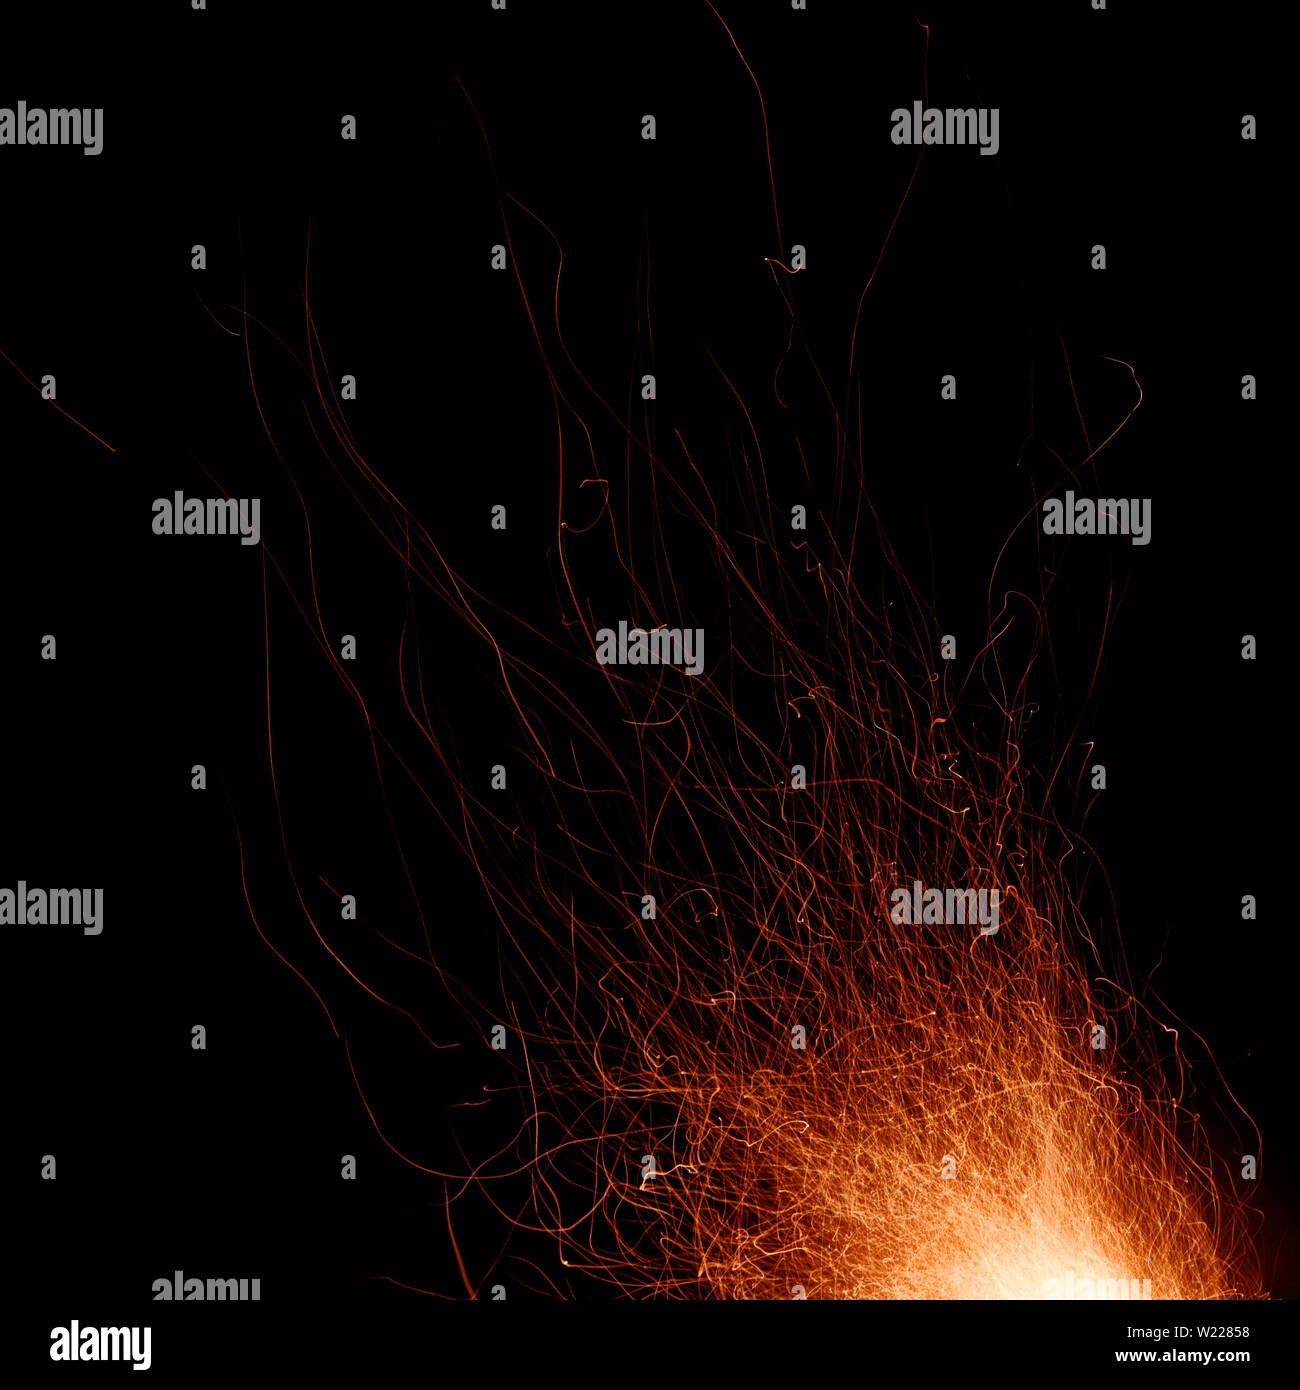 Abstract image of a fire sparks on a black background. Shot on a long exposure Stock Photo